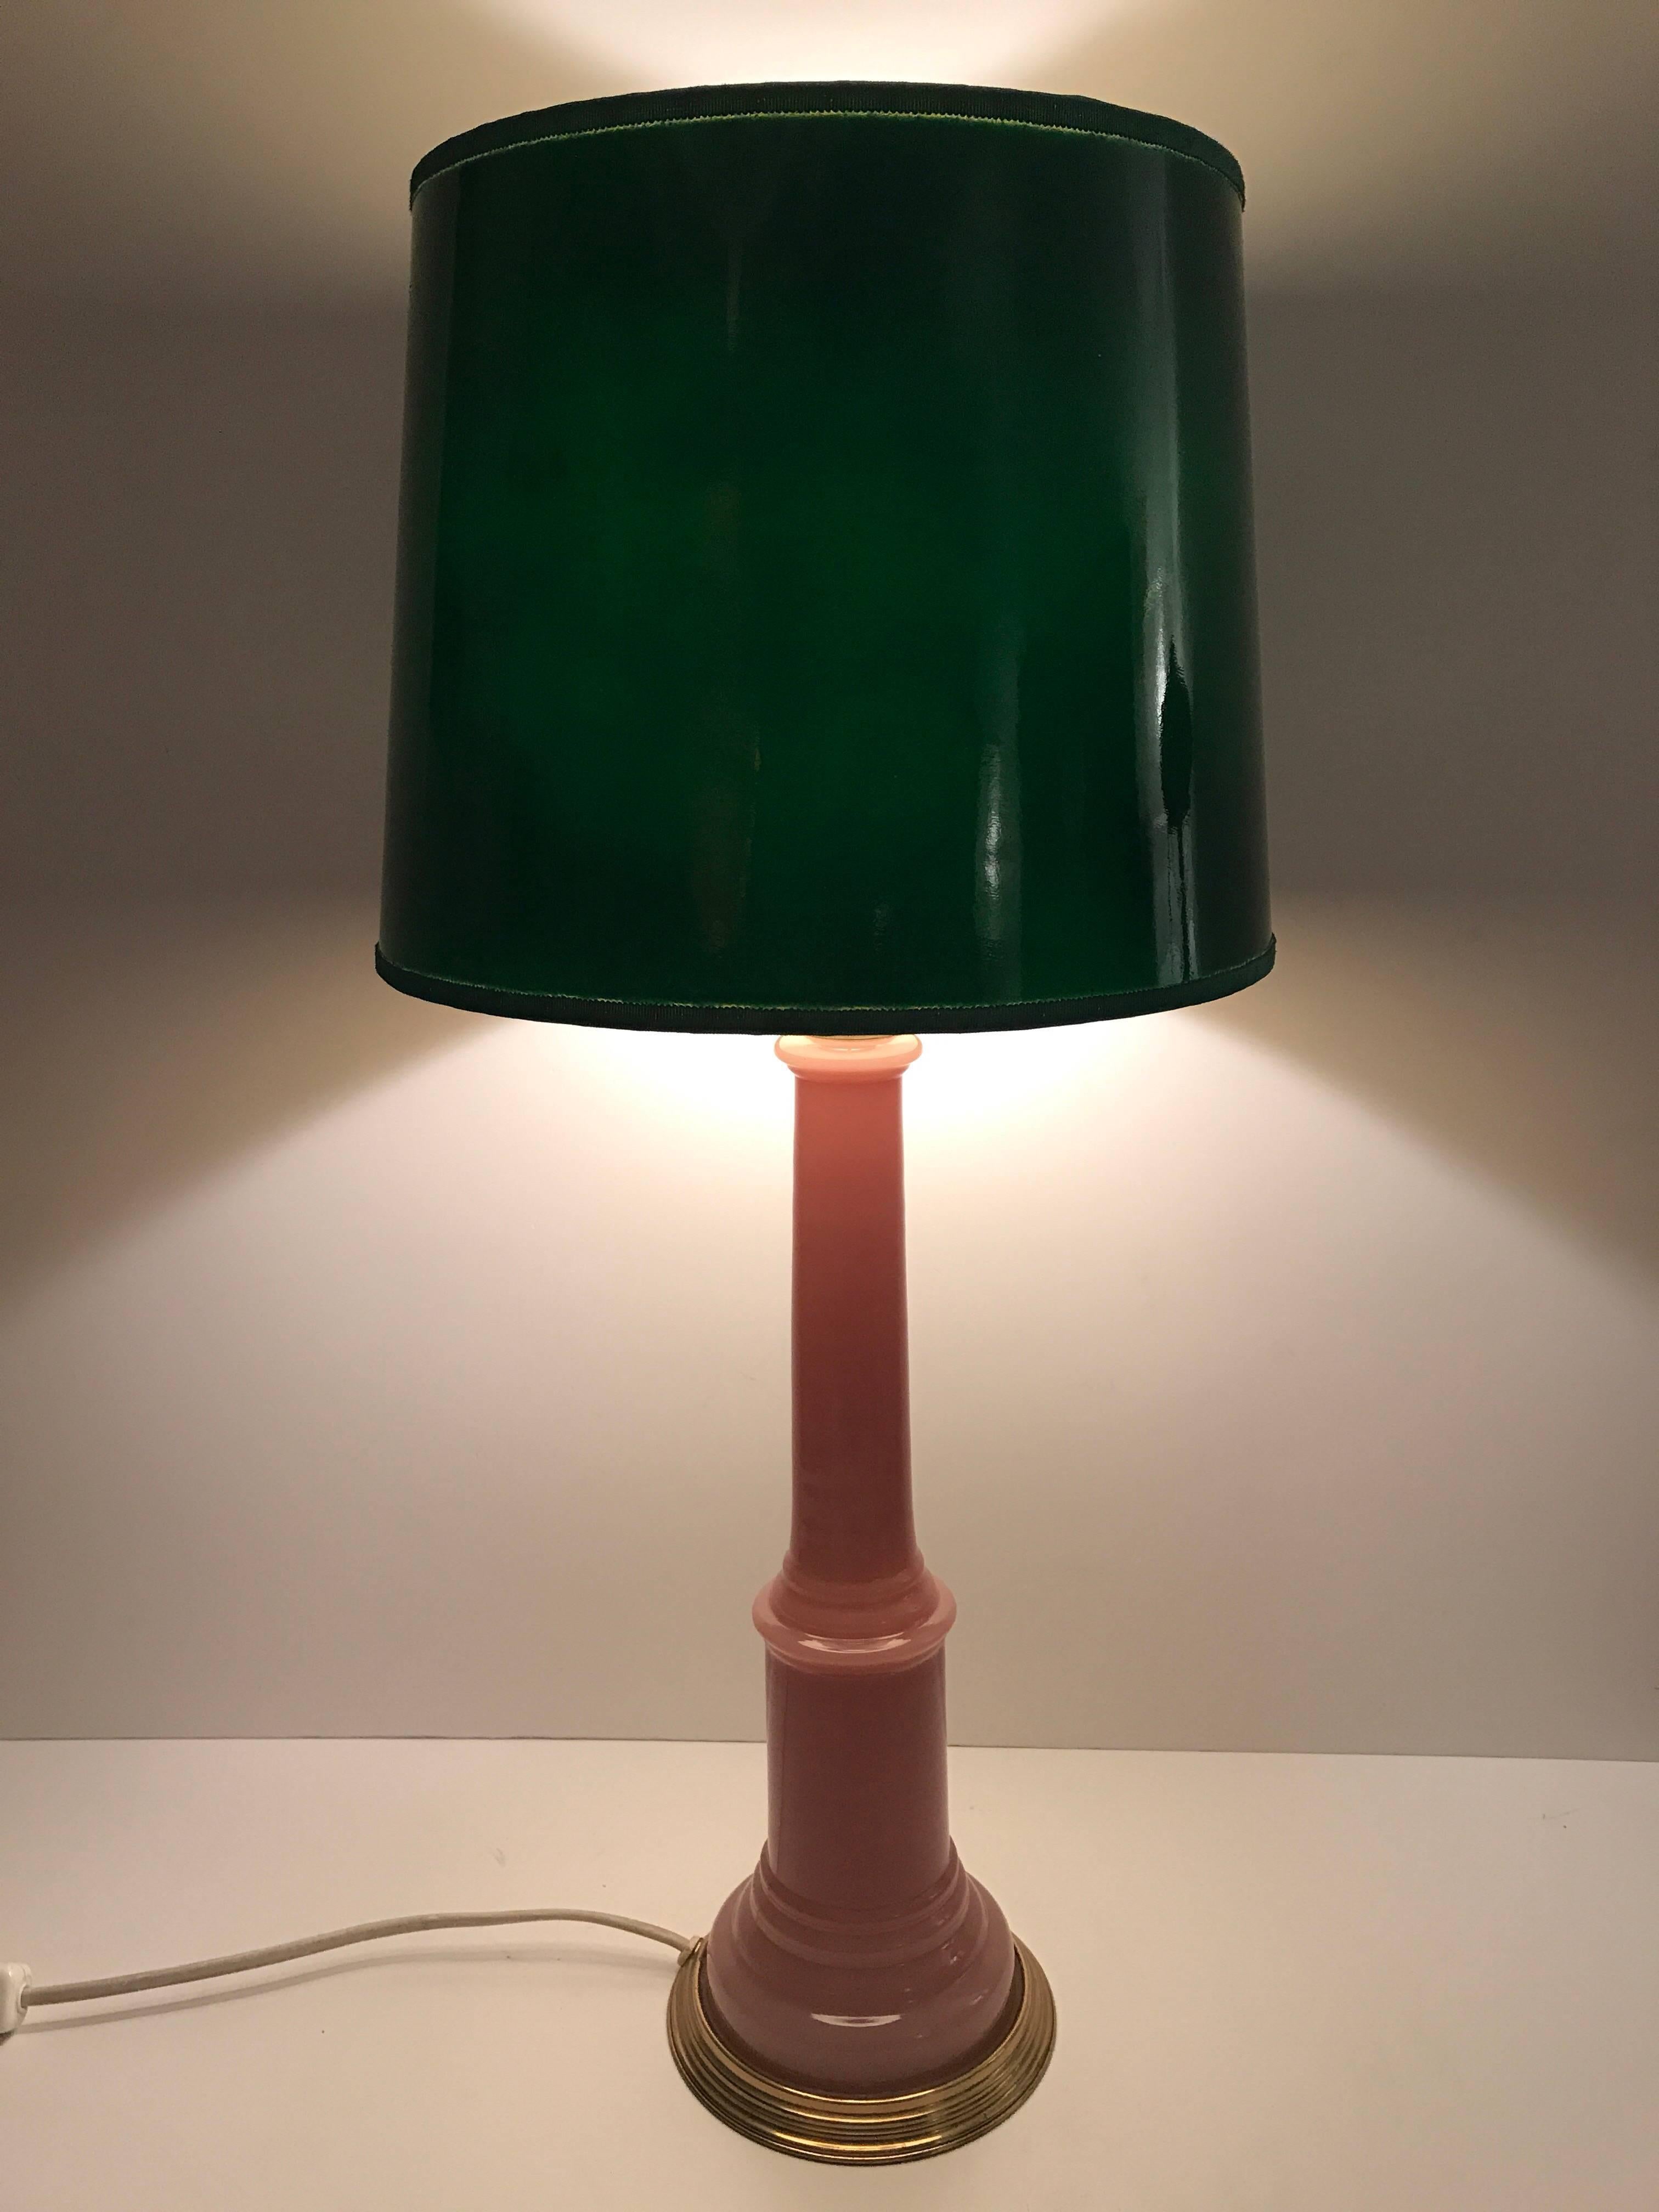 Pair of large Swedish Josef Frank opaline glass table lamps Svenskt Tenn model 2583. A beautiful pair of pink or light bourdeaux colour opaline glass and brass lamps. They are large and measure 65 cm in height and the shade has a diameter of 30 cm.